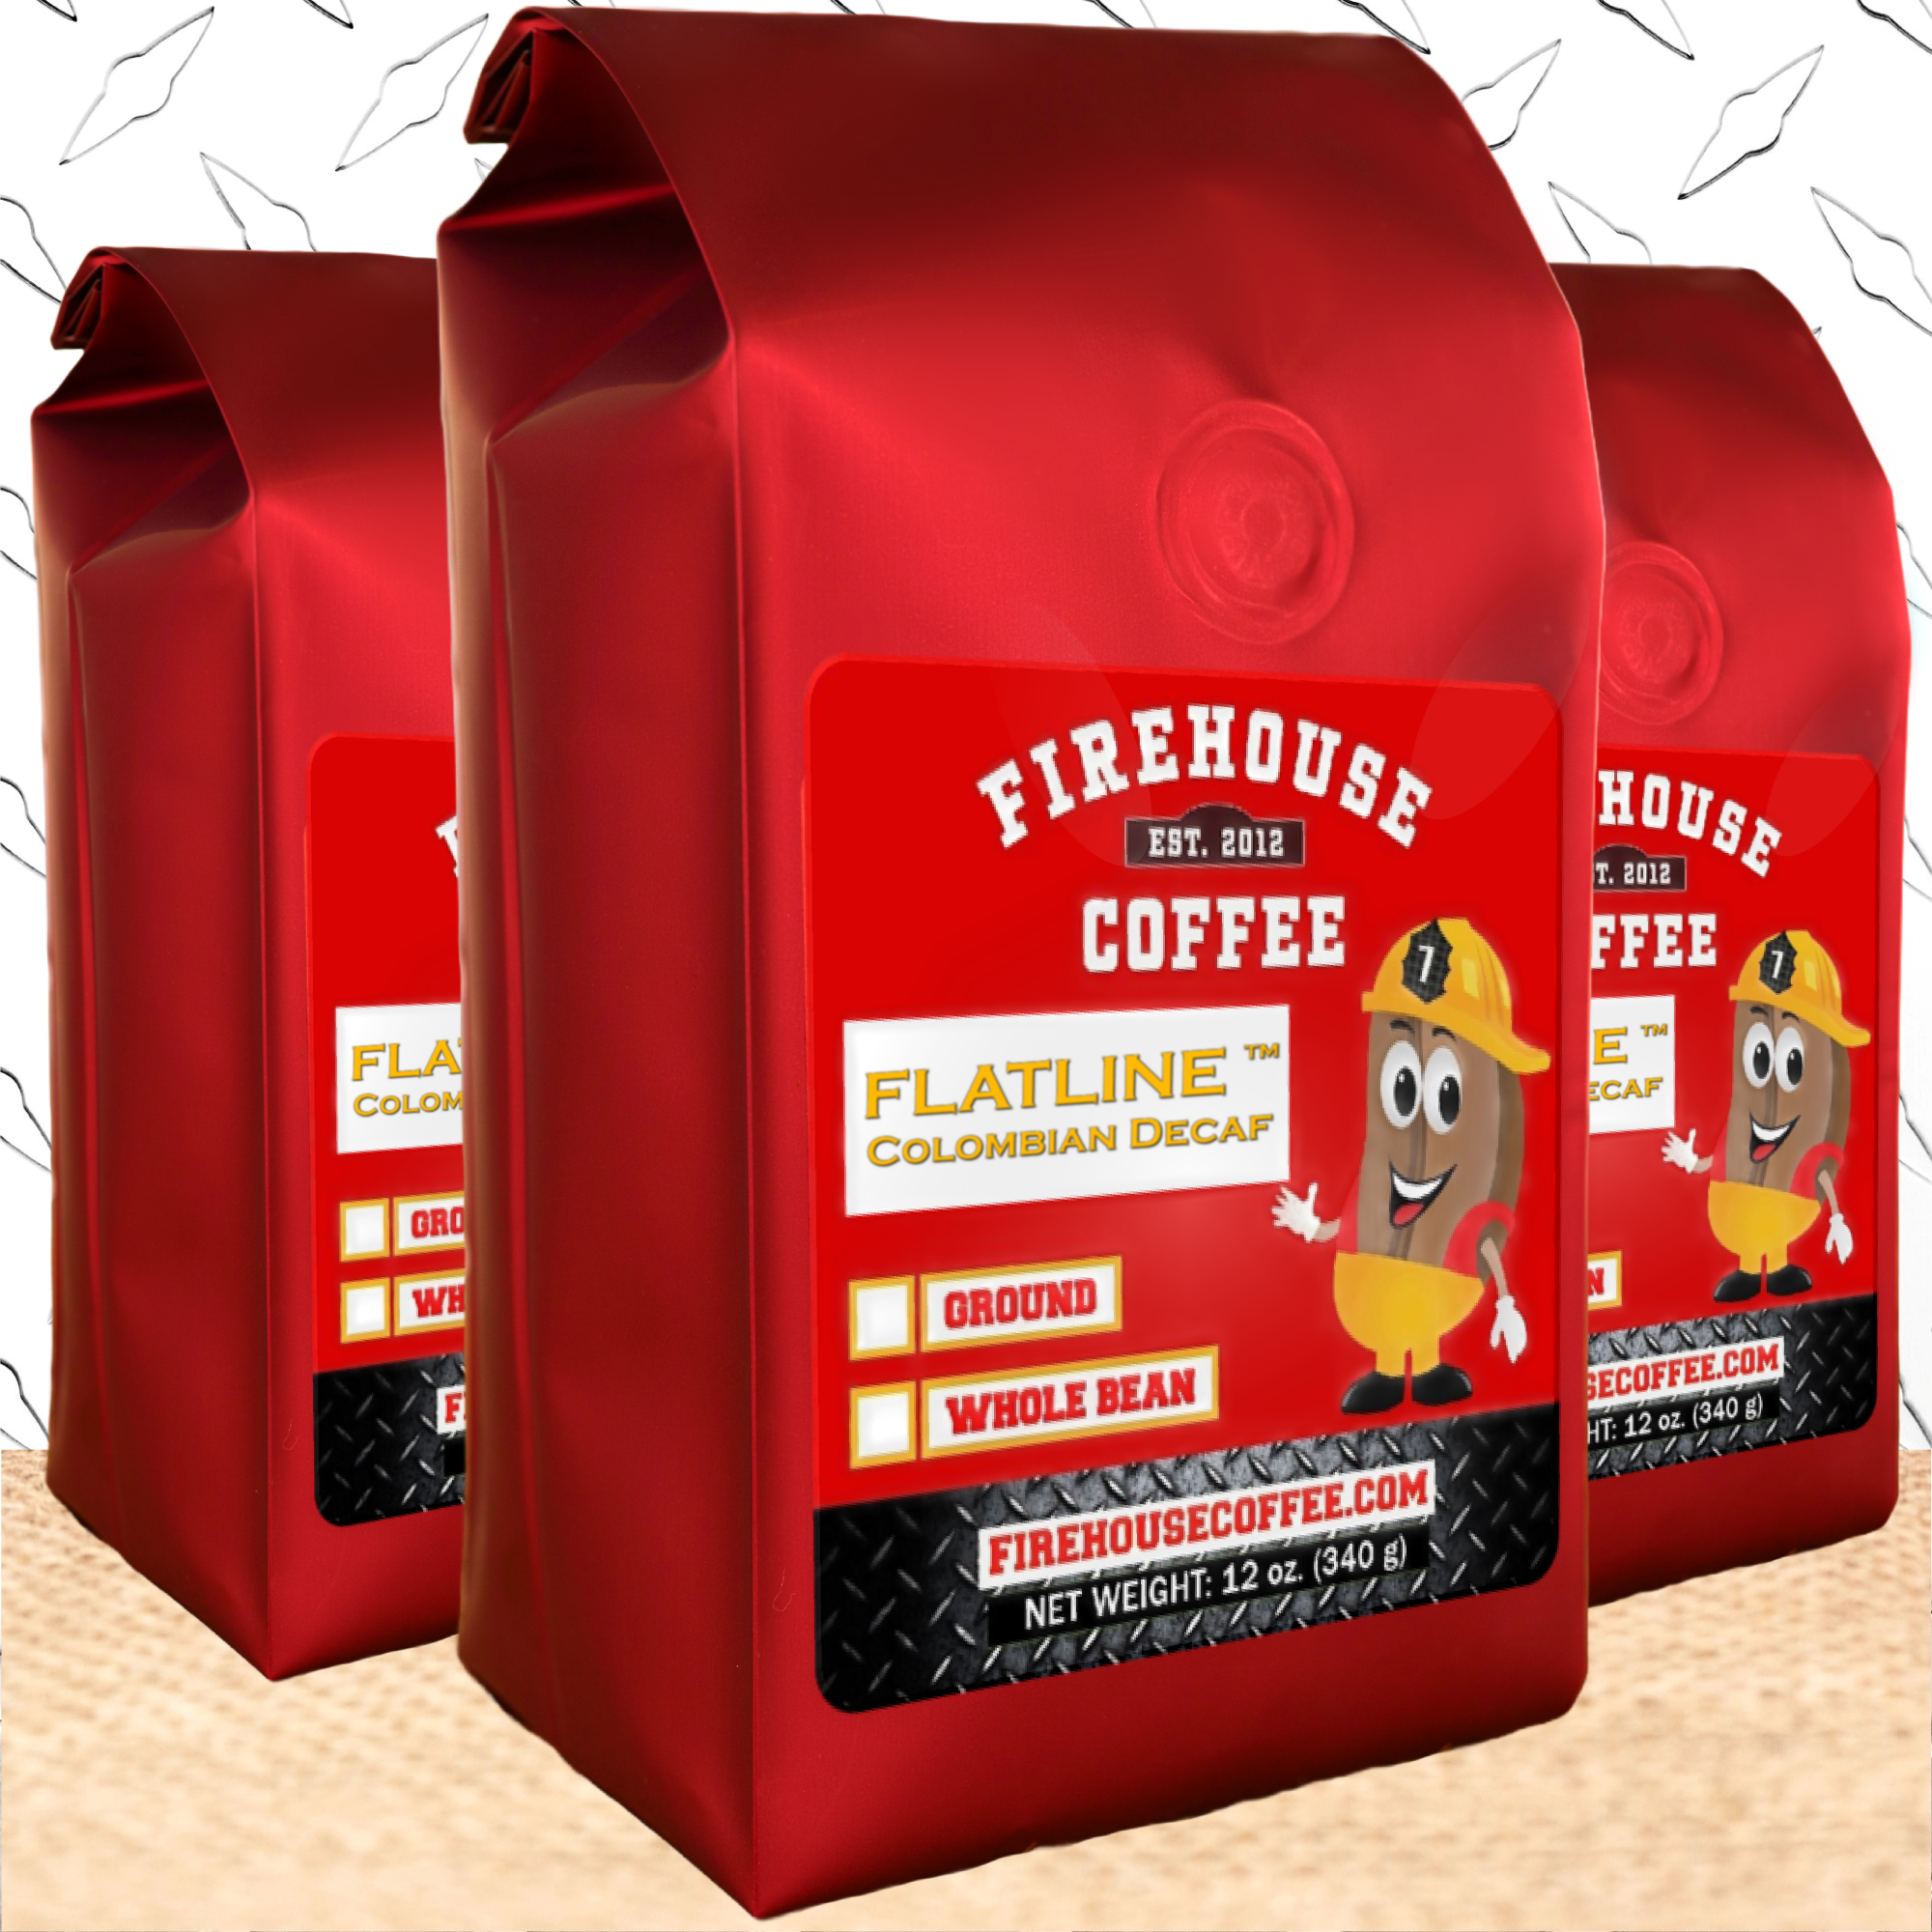 12 oz bags of Colombian Decaf Coffee